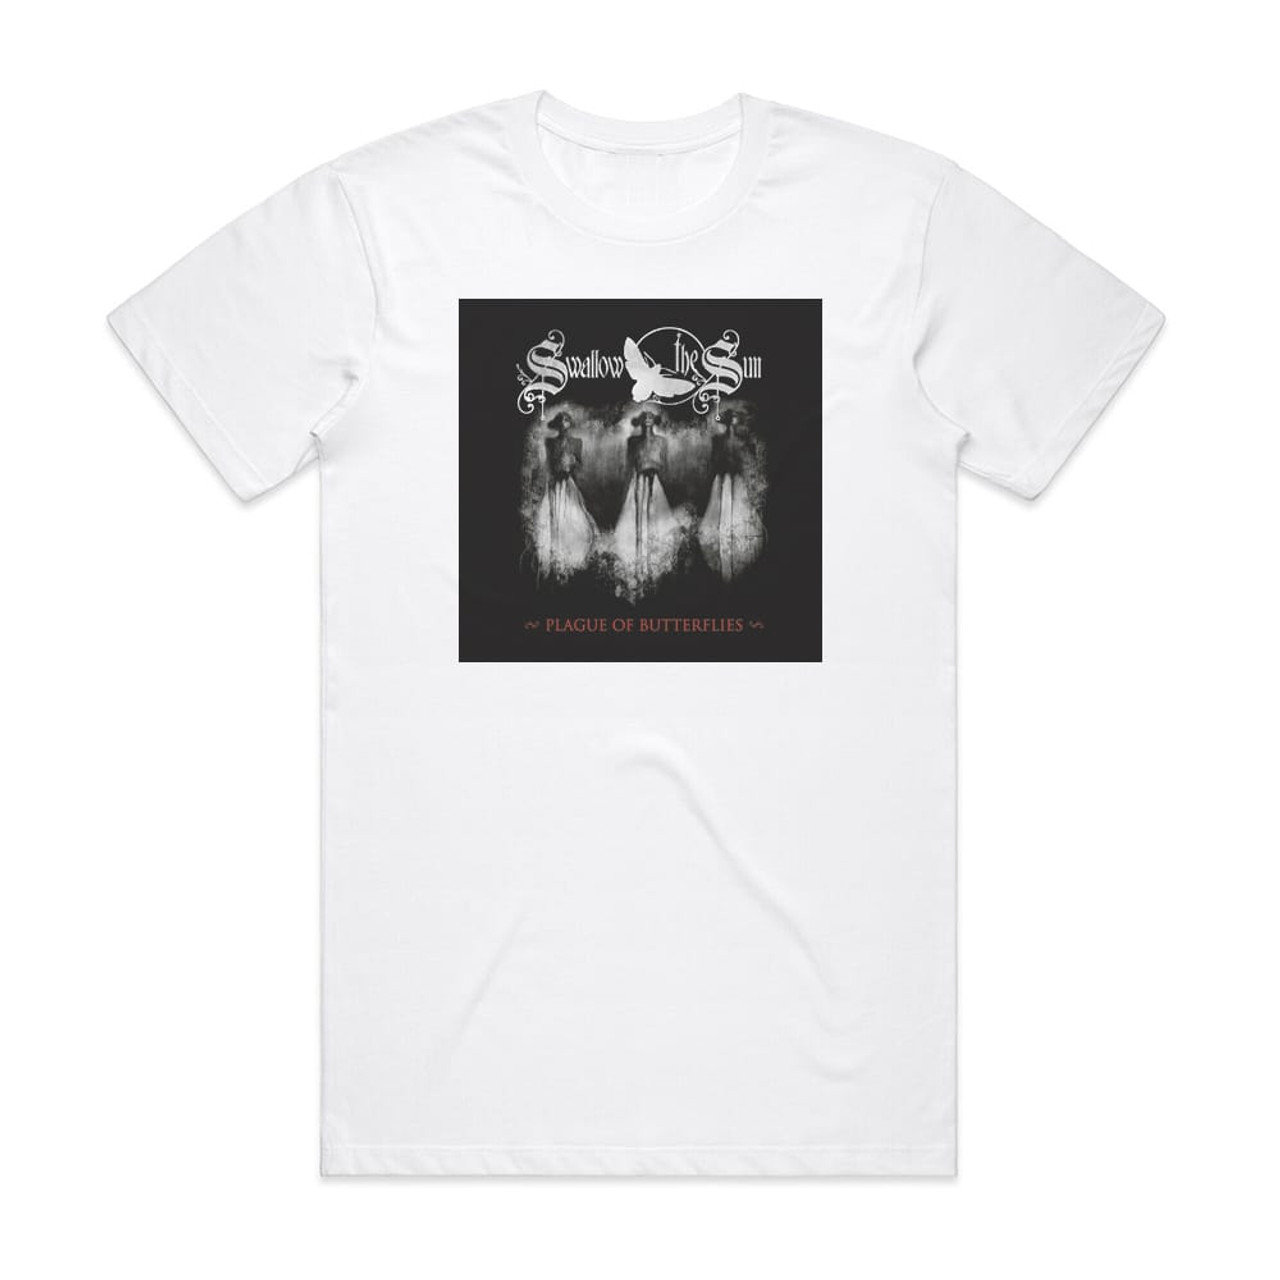 Swallow the Sun Plague Of Butterflies Out Of This Gloomy Light Album Cover T -Shirt White